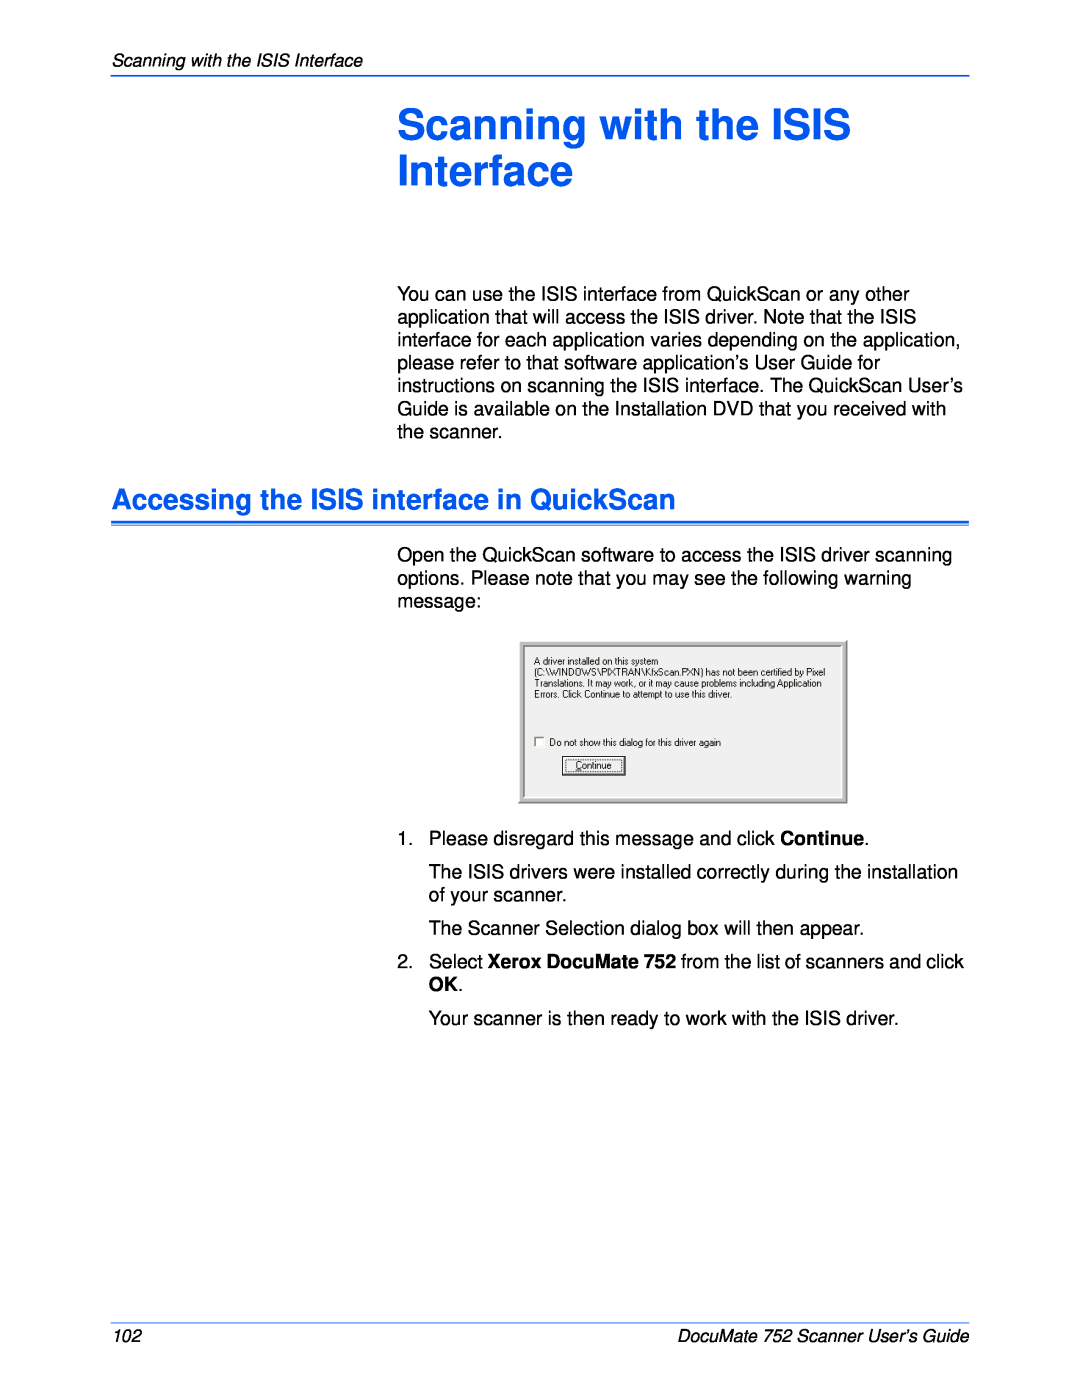 Xerox 752 manual Scanning with the ISIS Interface, Accessing the ISIS interface in QuickScan 